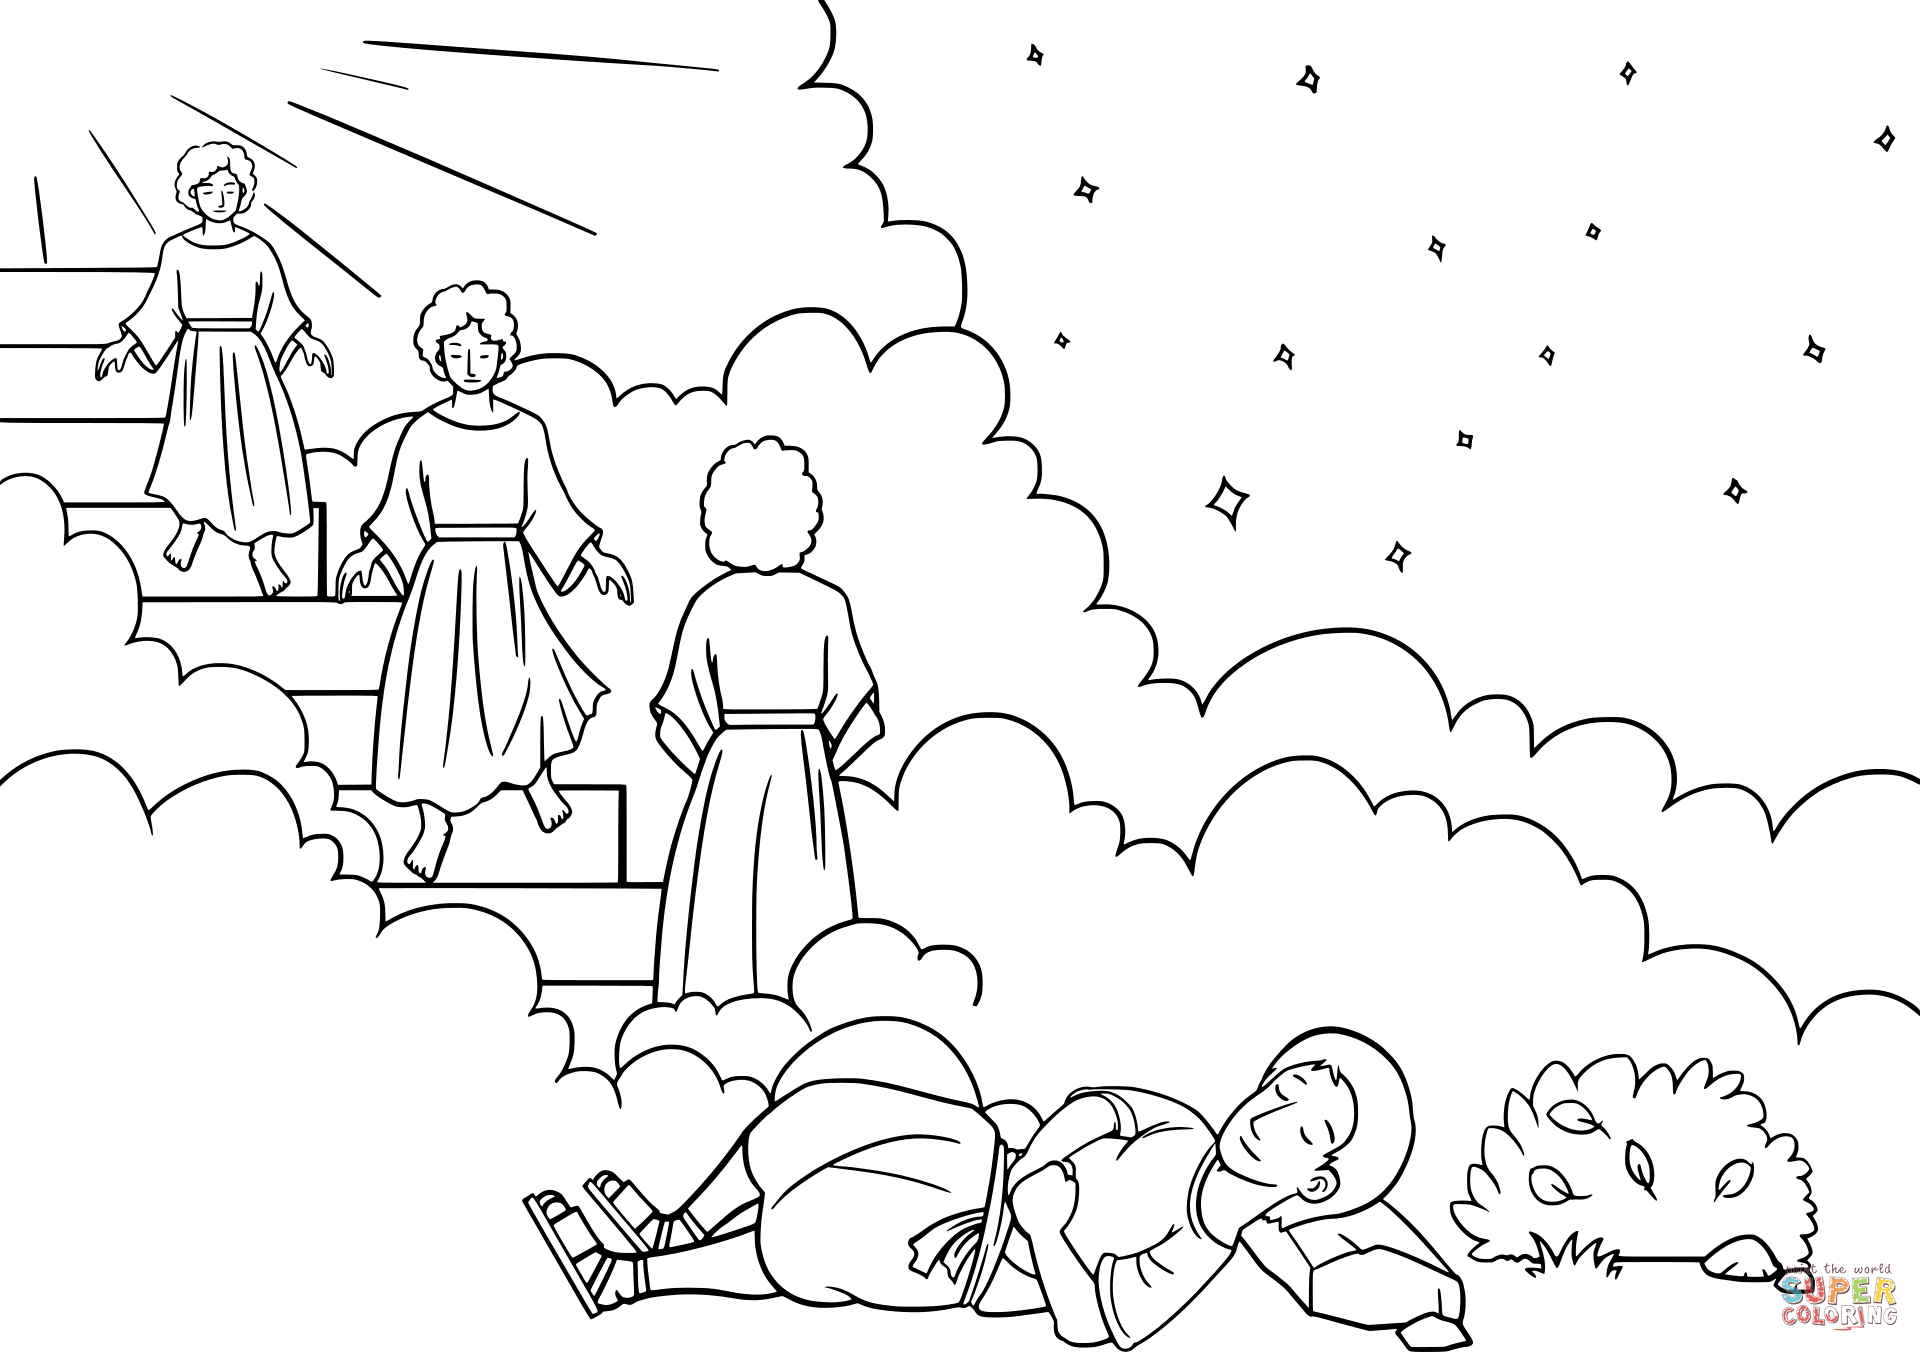 Jacobs ladder dream coloring page free printable coloring pages